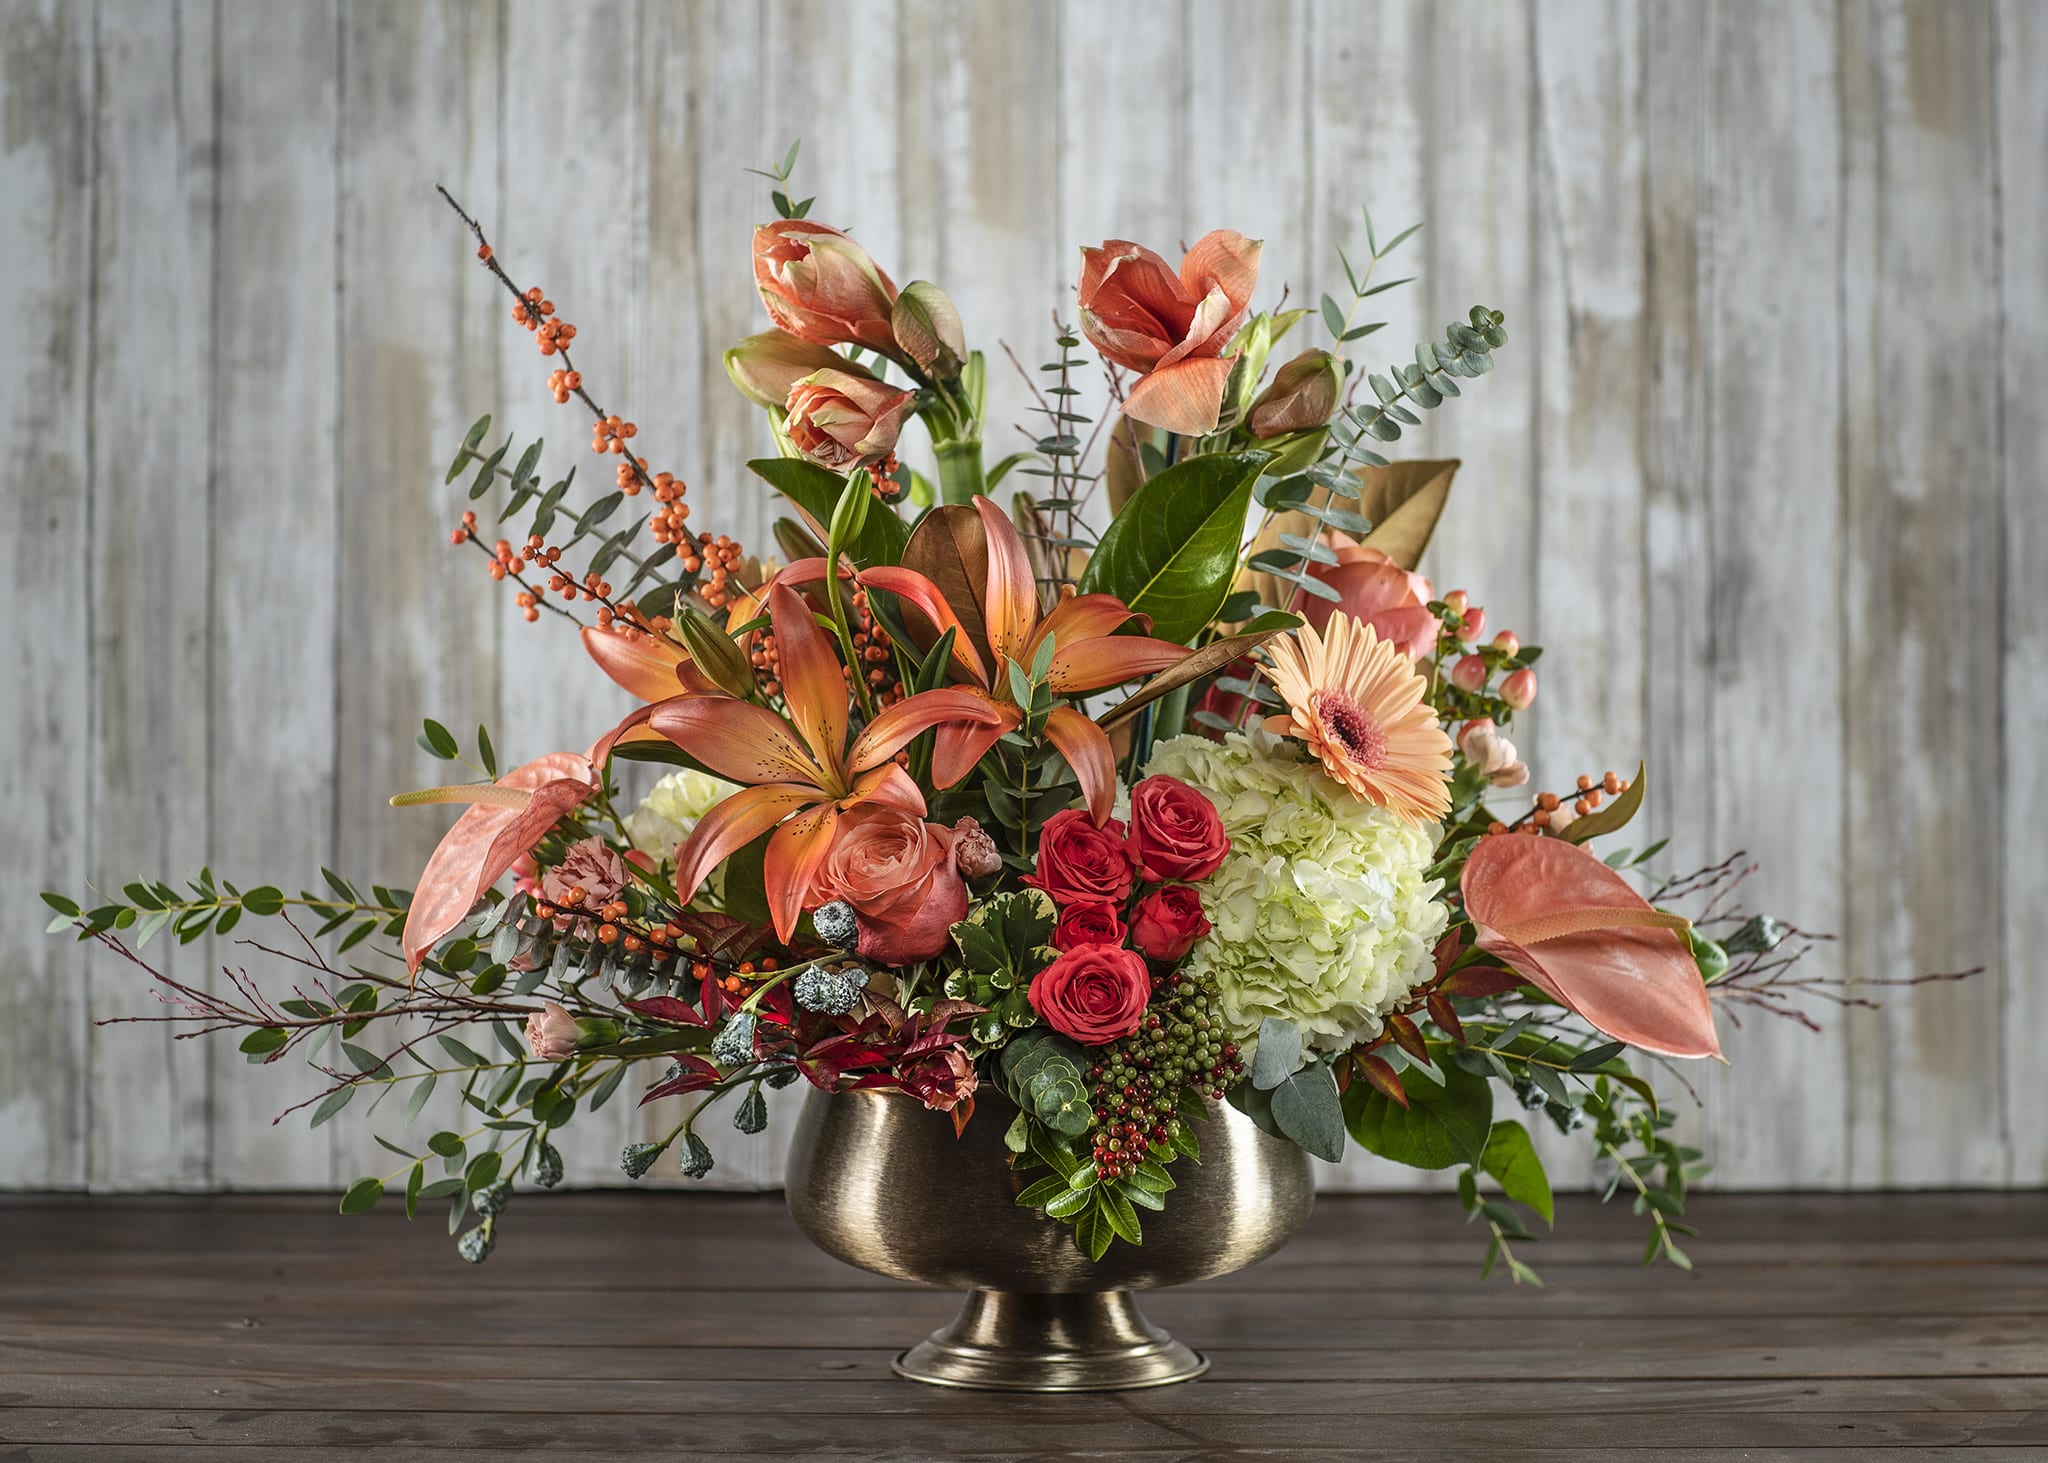 Peach Cobbler - This delightful design measures approx. 15x20, $165.00,  Includes peach Amaryllis, local non scented lilies and a variety of NW textured accents. A perfect centerpiece for friends or family. Other colors are available, call for options. Designed in a gold tone footed compote,  and delivered by us, a real Portland florist to anywhere in the greater Portland metro area. Place your order online, or call us directly 503 223 1646